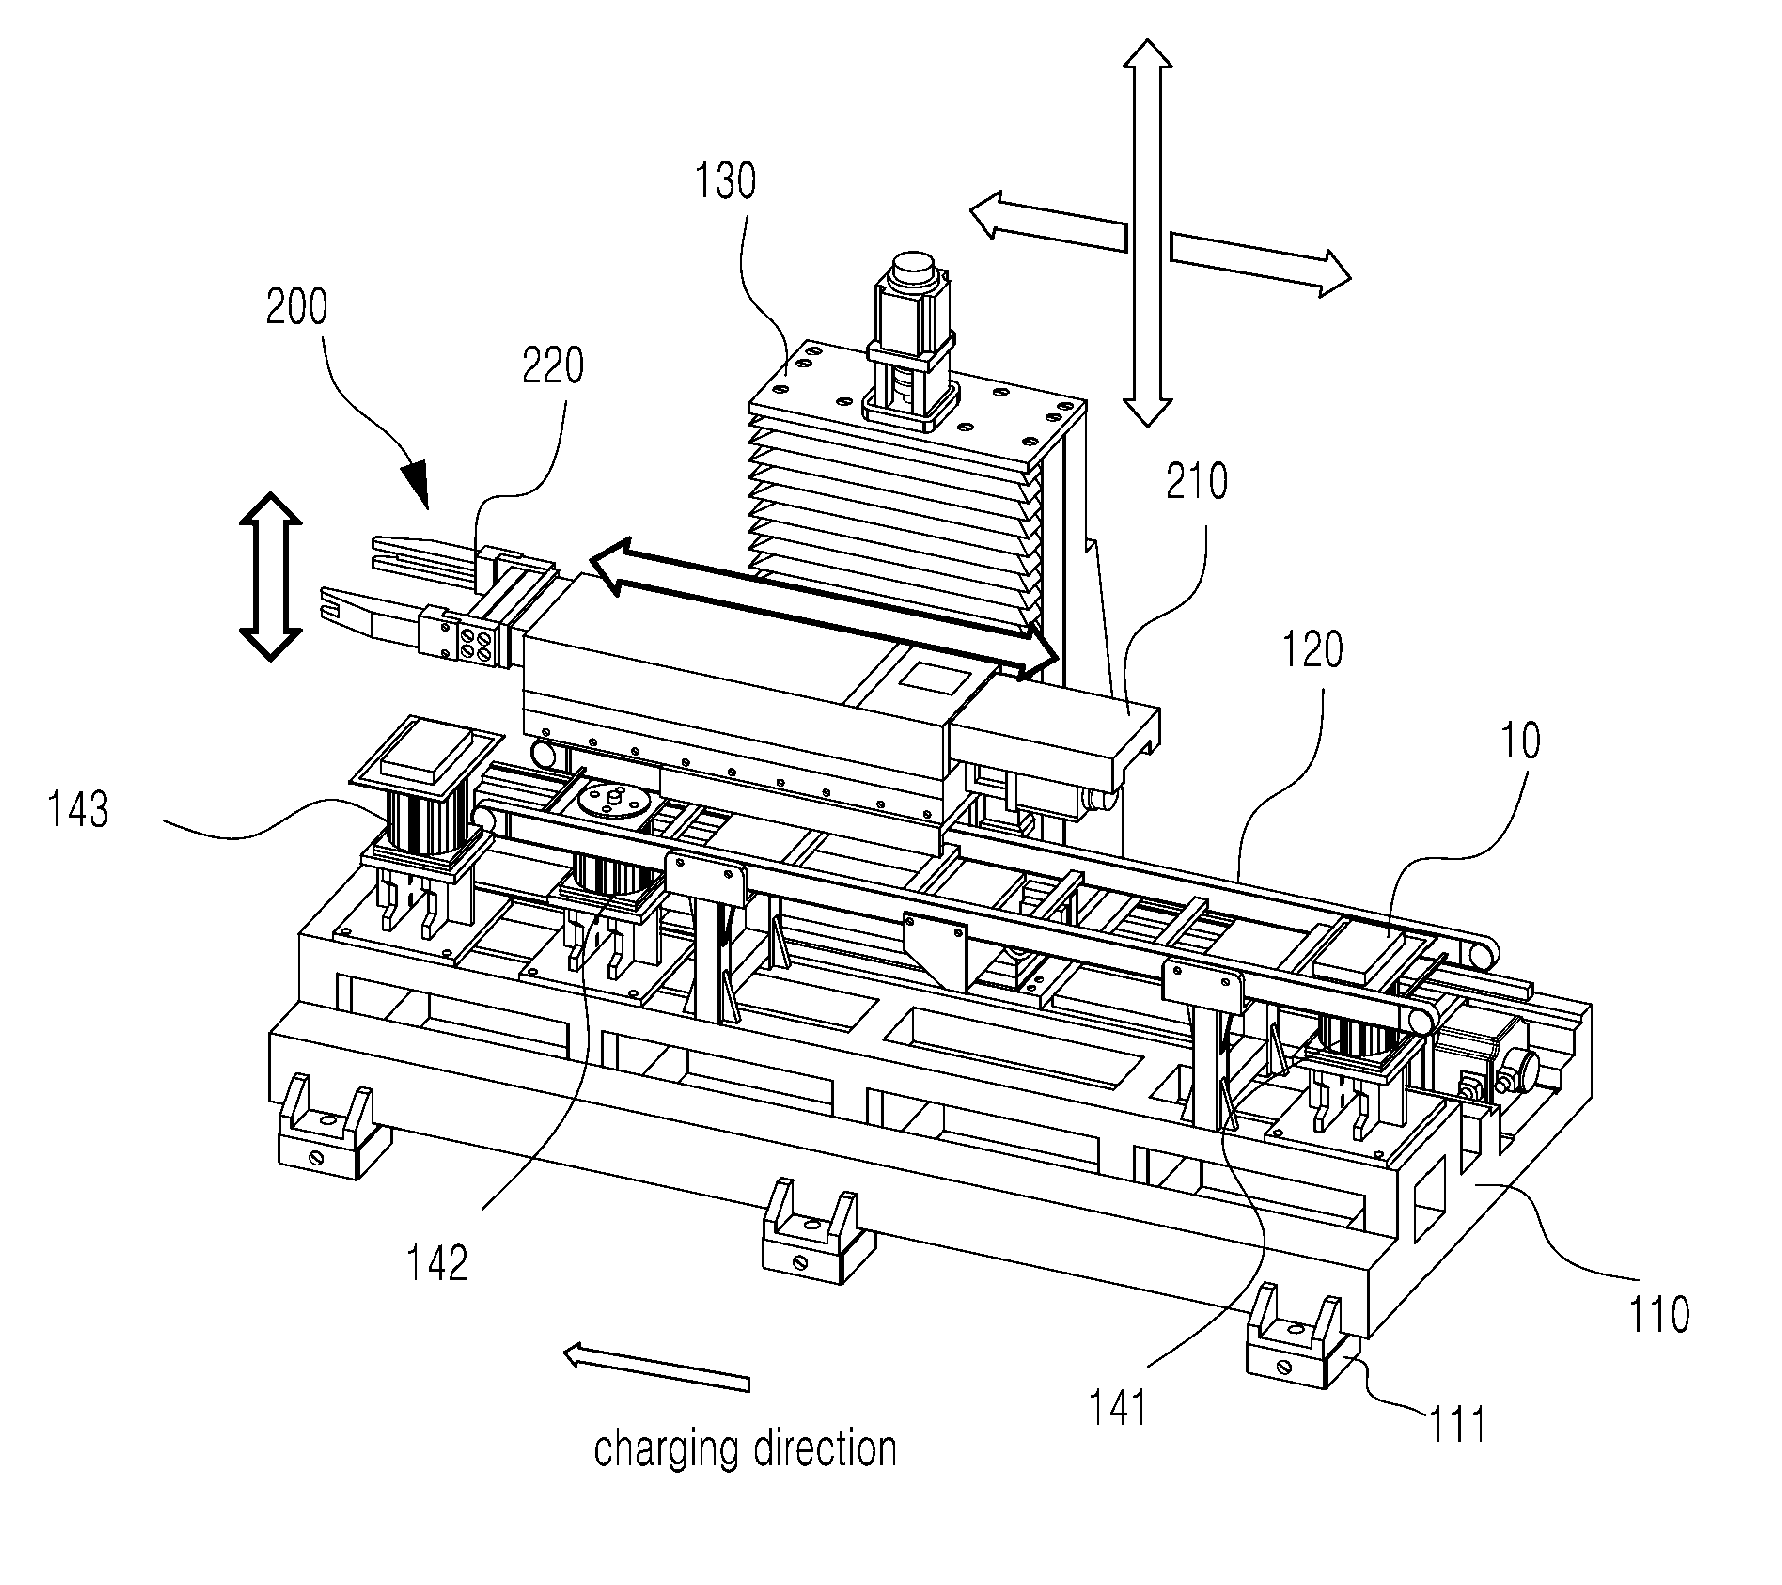 Charging device of a welding fixture of spacer grid